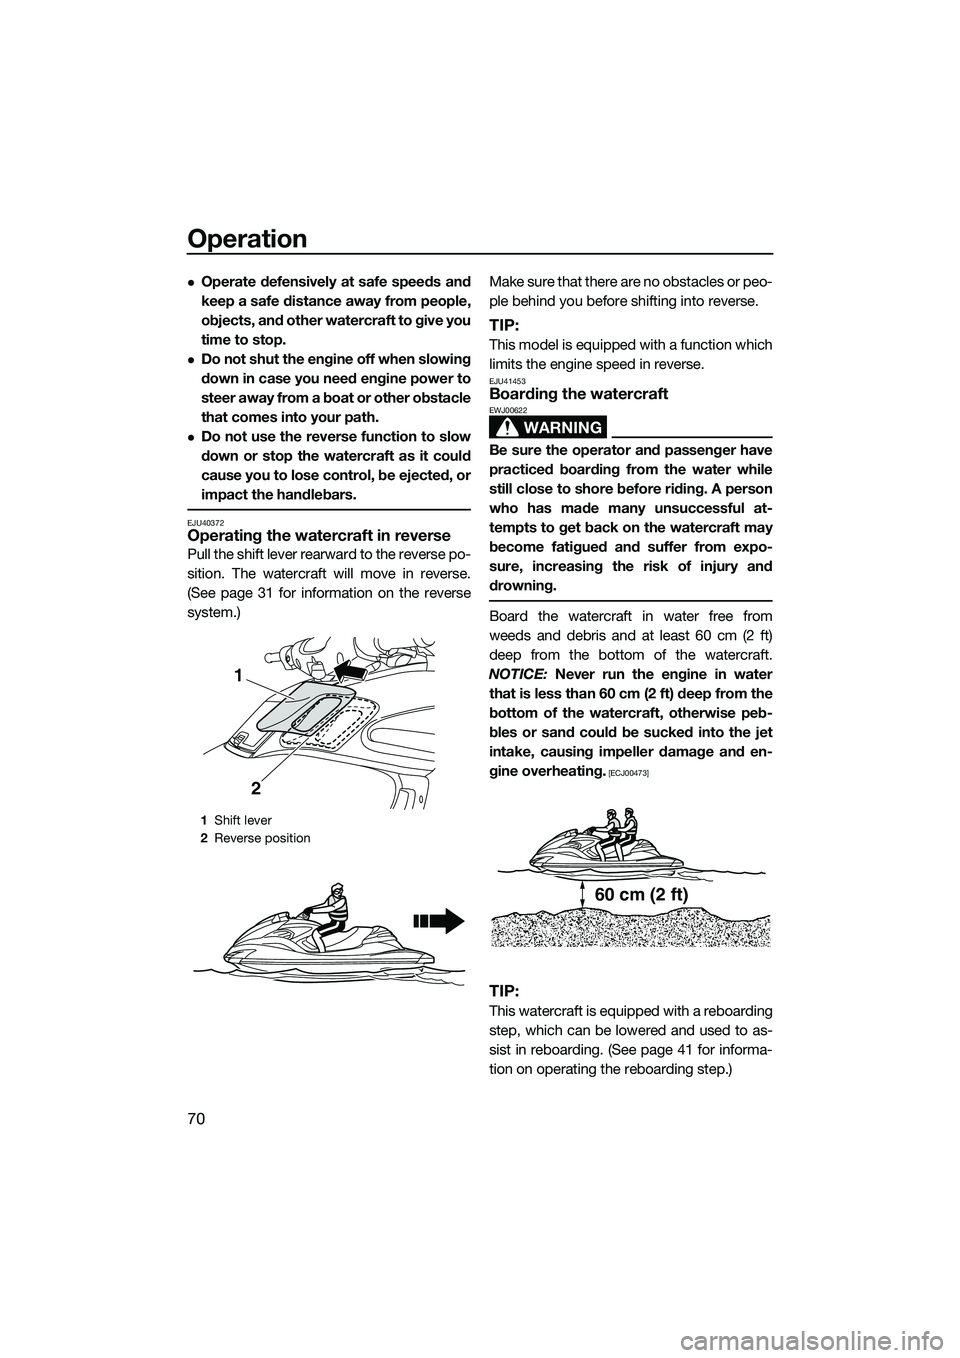 YAMAHA FZR SVHO 2014  Owners Manual Operation
70
Operate defensively at safe speeds and
keep a safe distance away from people,
objects, and other watercraft to give you
time to stop.
Do not shut the engine off when slowing
down in